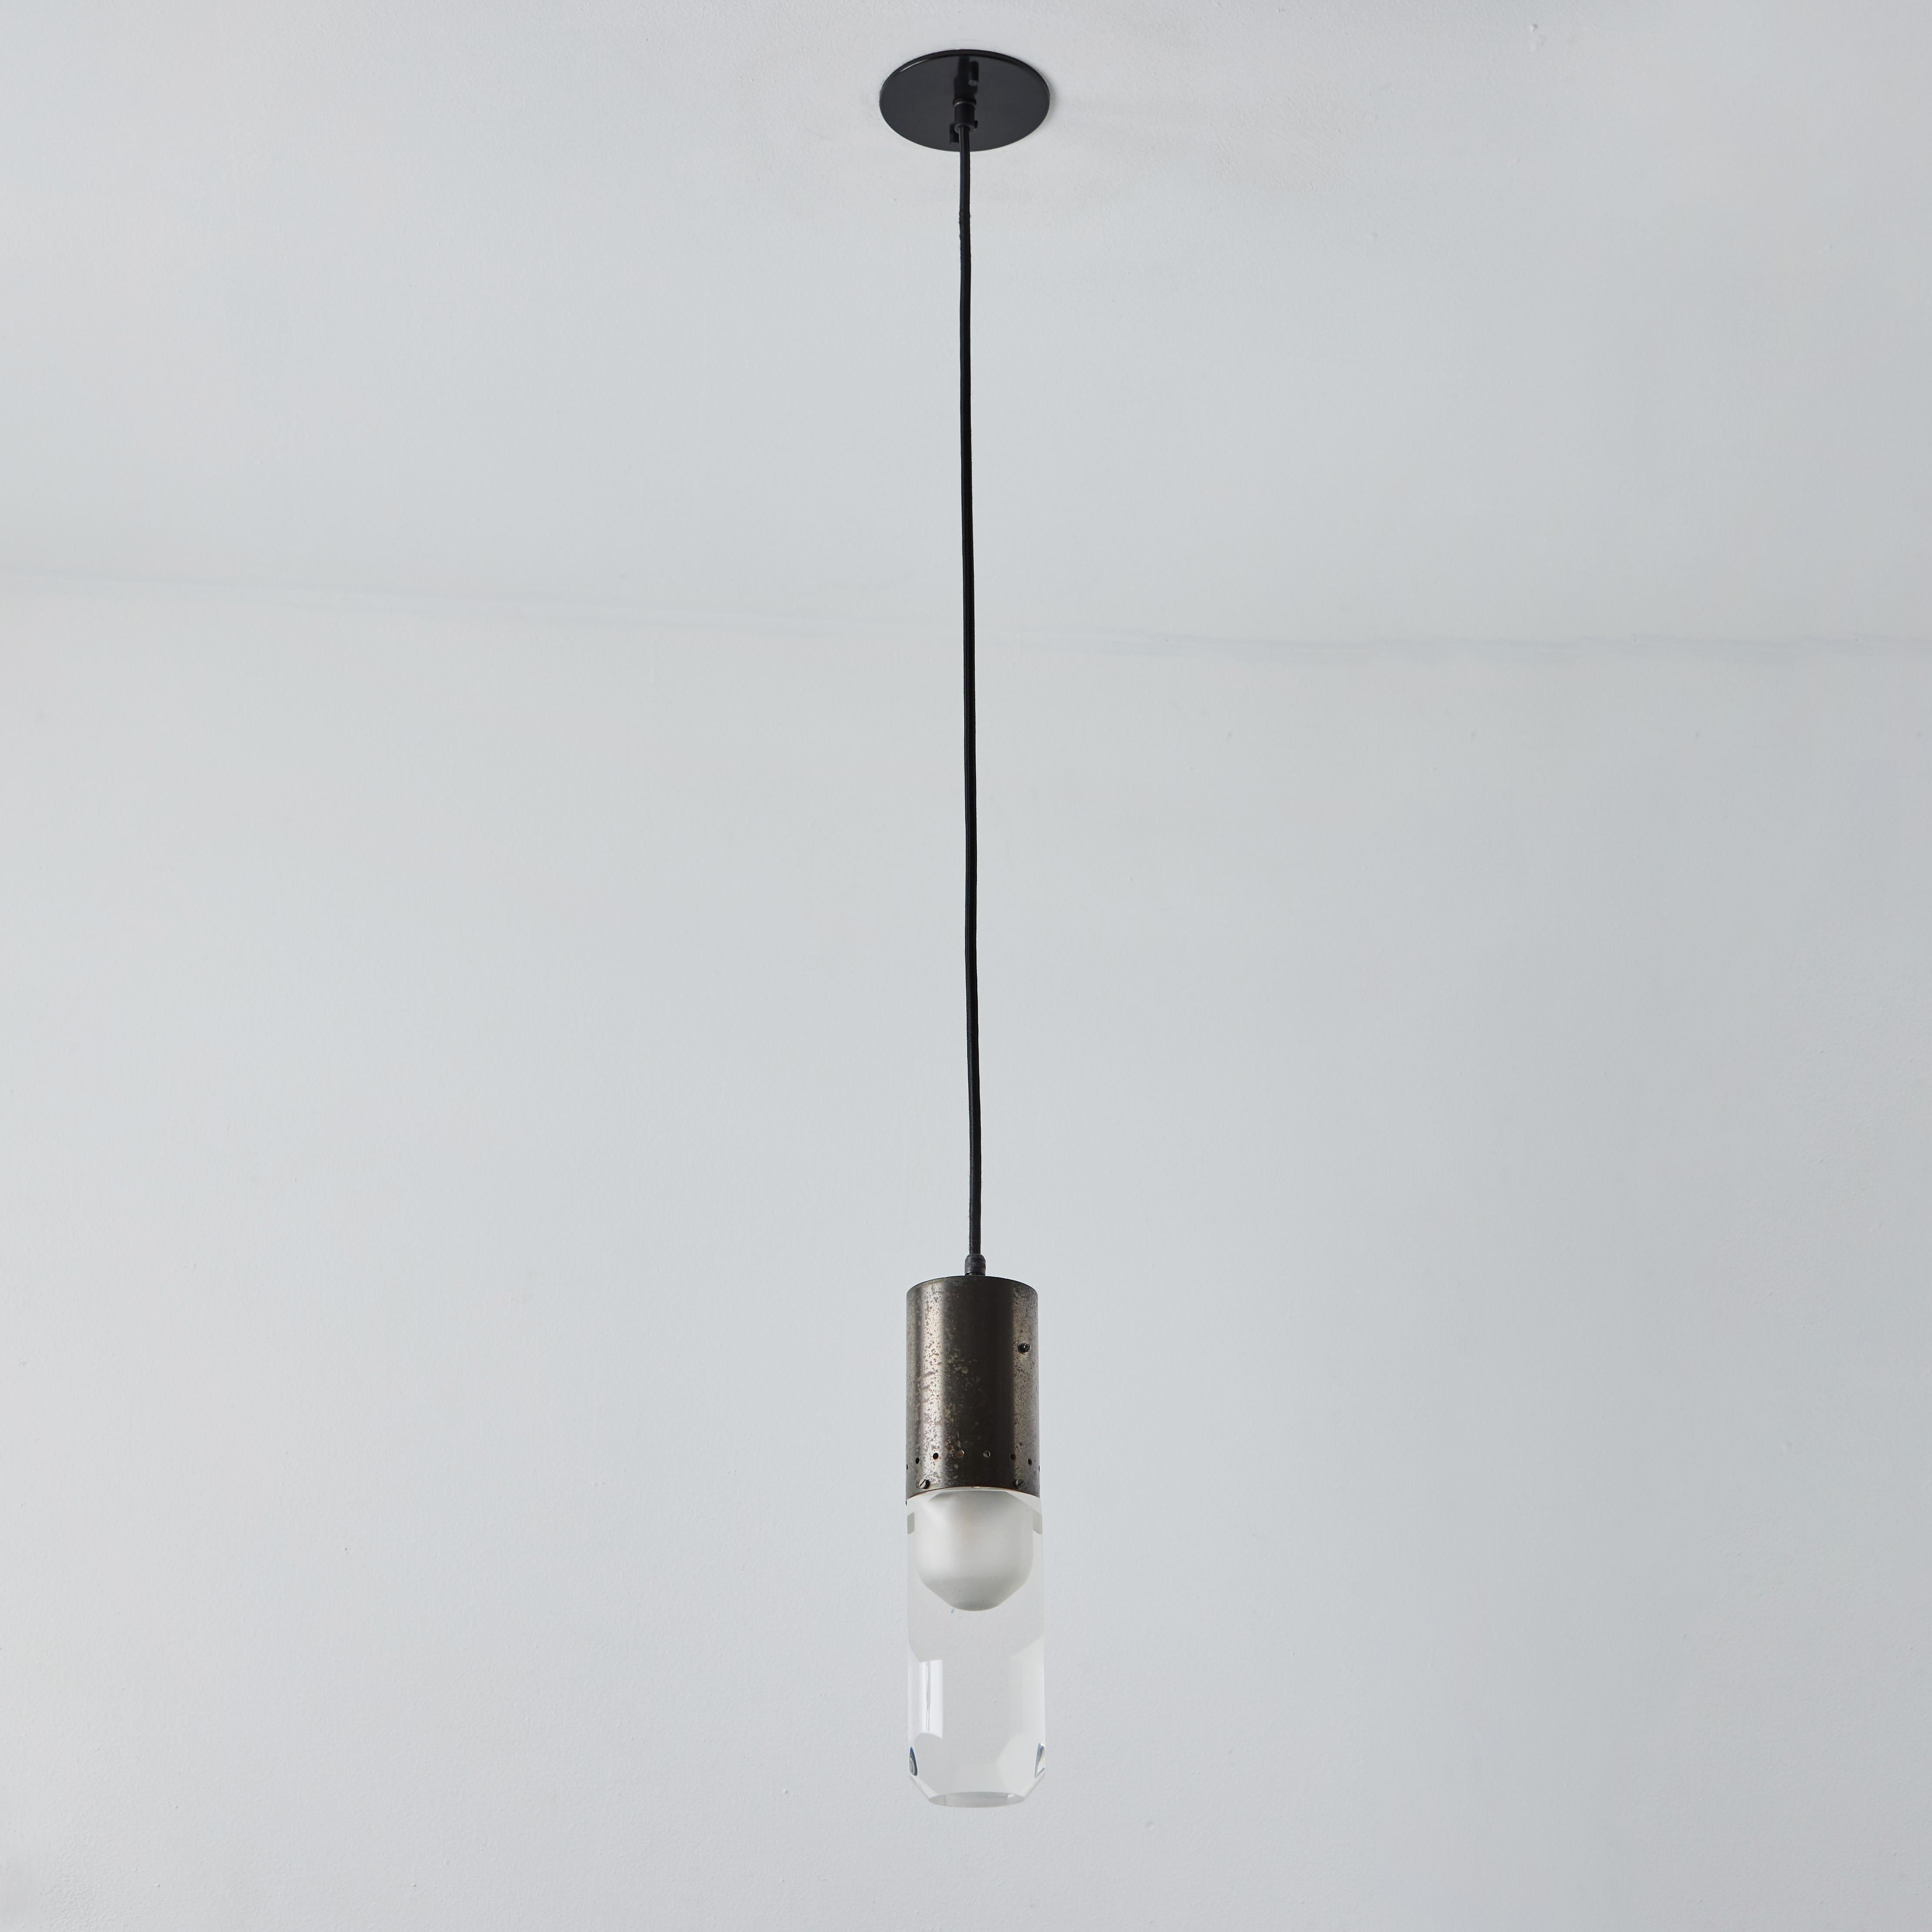 1960s Faceted Diffuser Pendant Lamp Attributed to Stilnovo For Sale 3